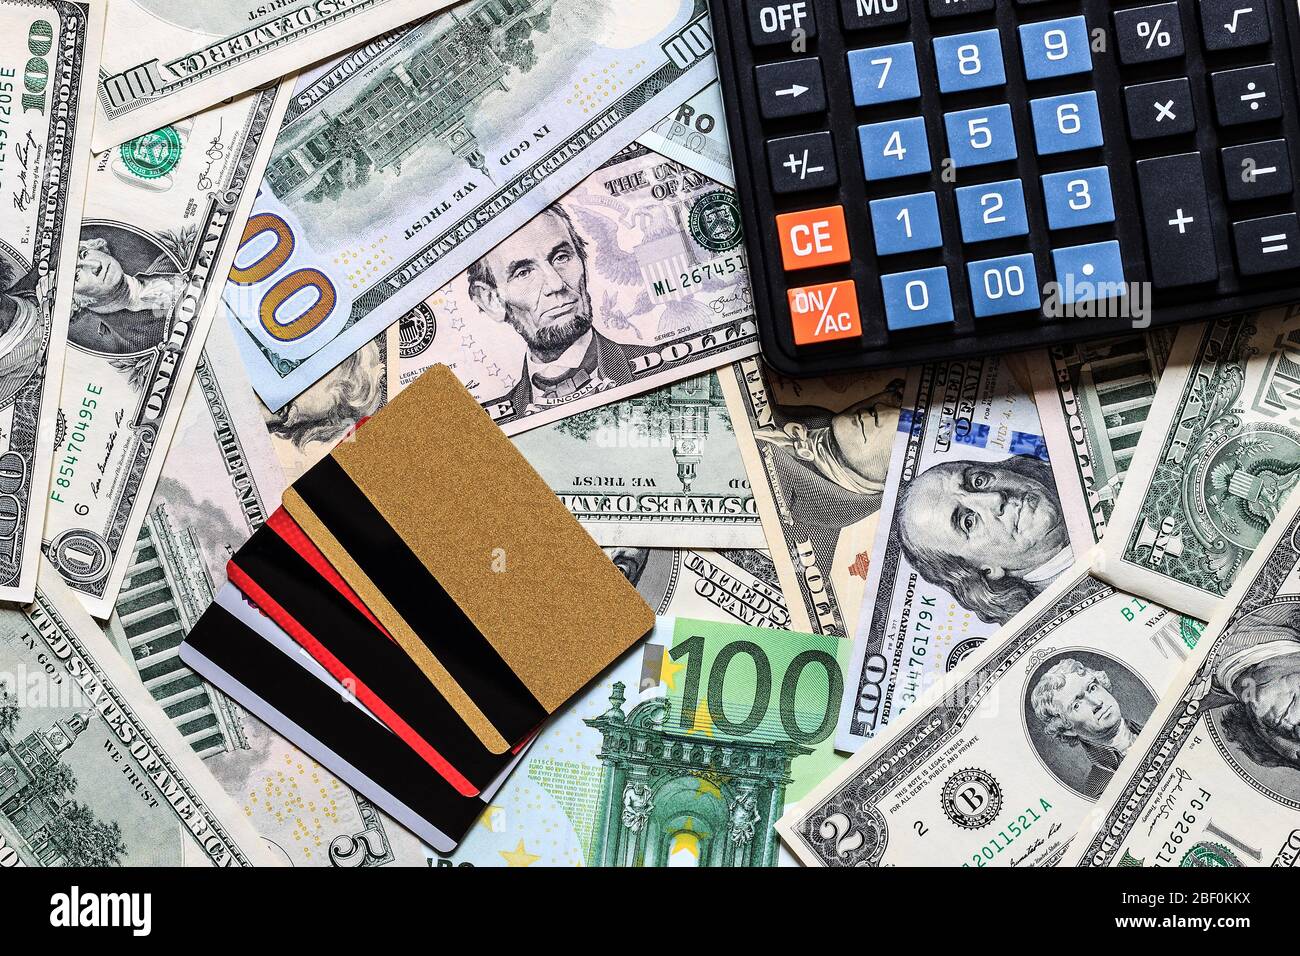 Background with money american dollar and euro bills, credit card and black  calculator. Cash money Stock Photo - Alamy